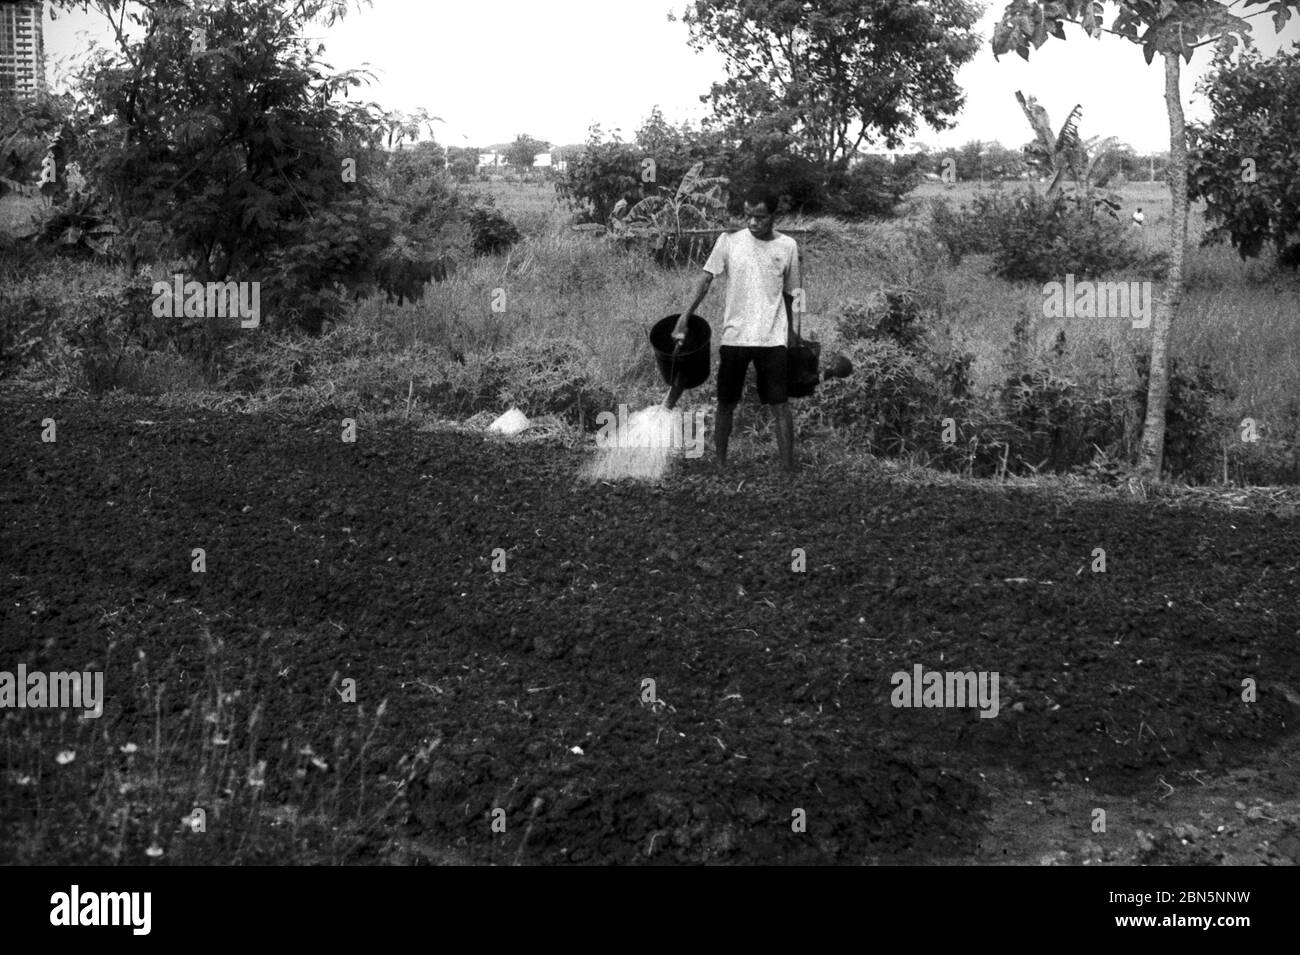 Farmer watering vegetable plants at an agricultural field in West Kelapa Gading Area in North Jakarta, Special Capital Region of Jakarta, Indonesia. Archival photo. Stock Photo